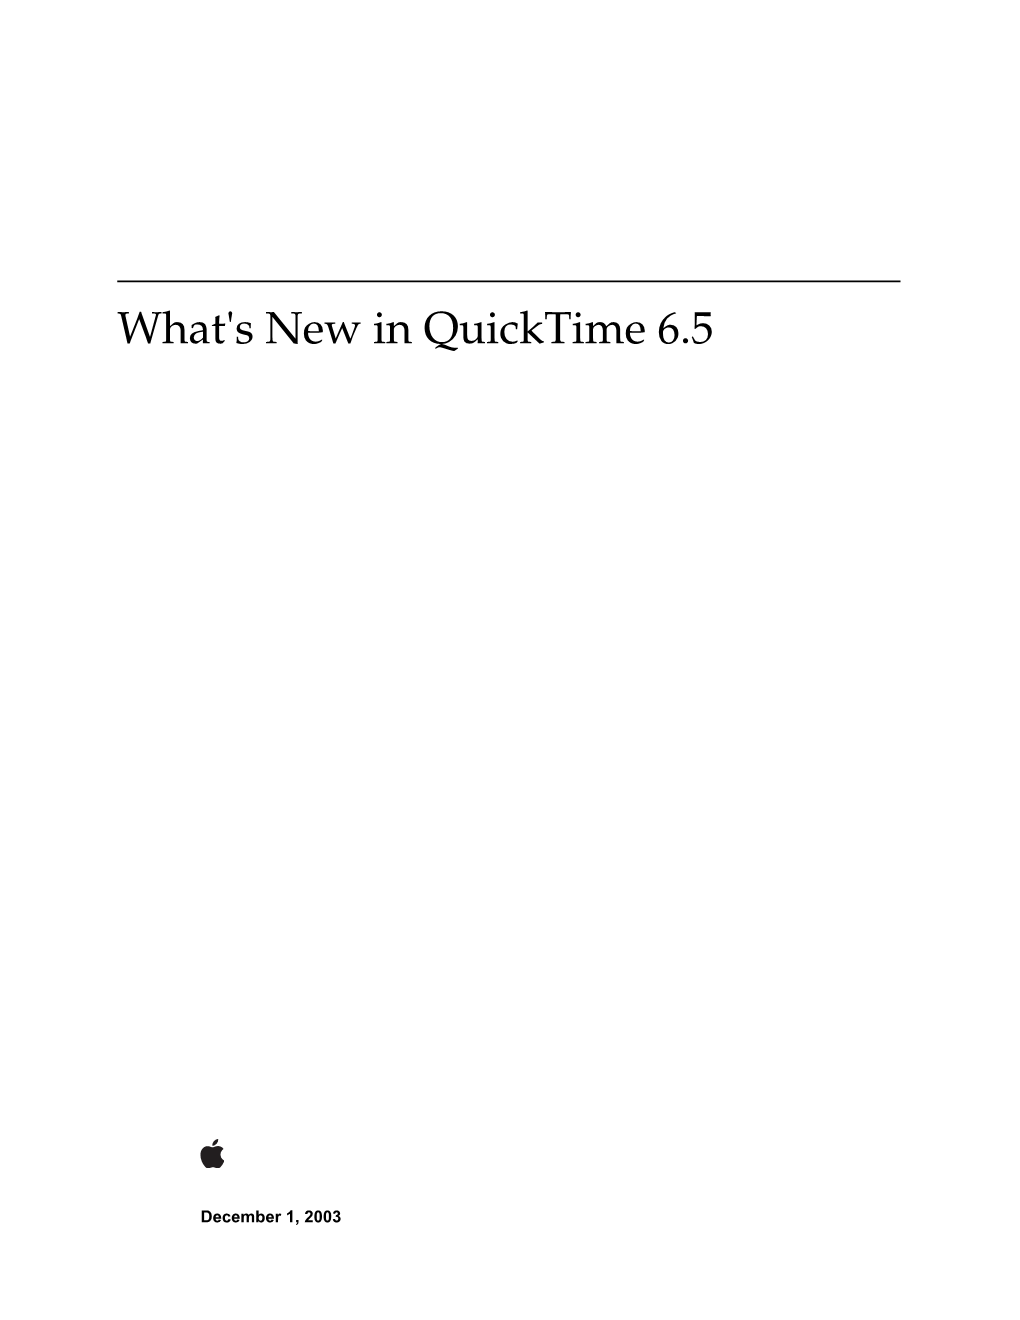 What's New in Quicktime 6.5